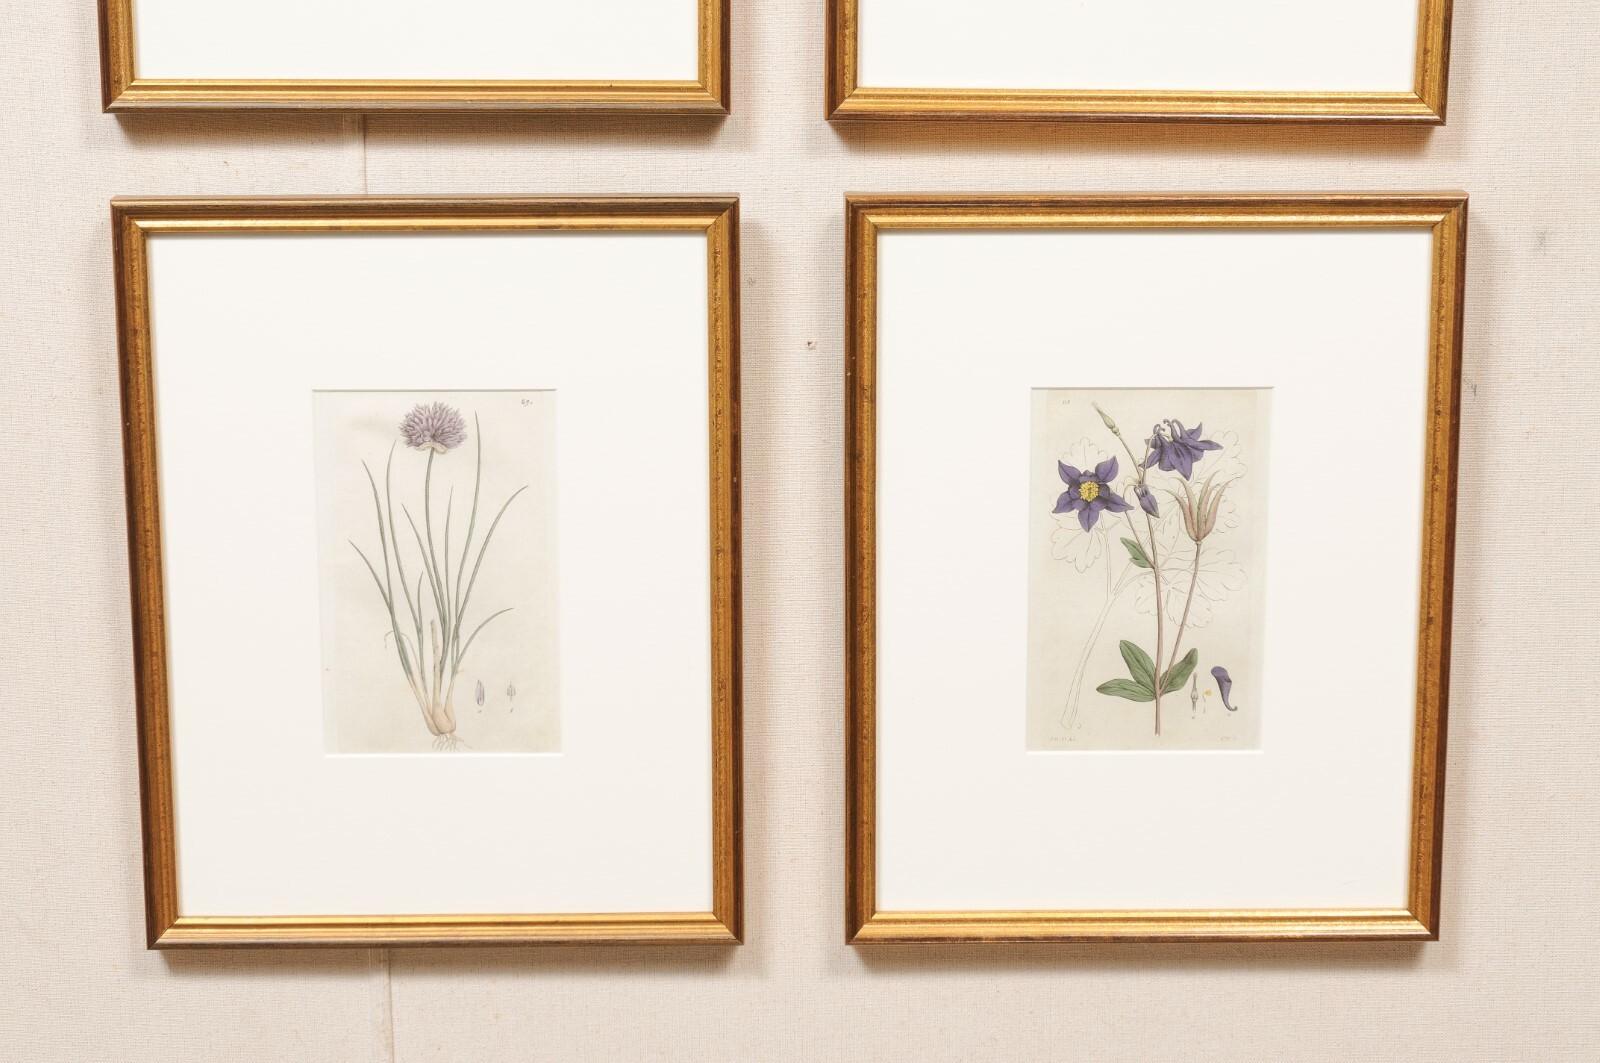 A collection of four art pieces of Swedish 18th century botanicals, displayed nicely within custom gold toned wooden frames. This set of framed wall decorations each features a separate hand colored engraving of a flowering plant species (circa 1760